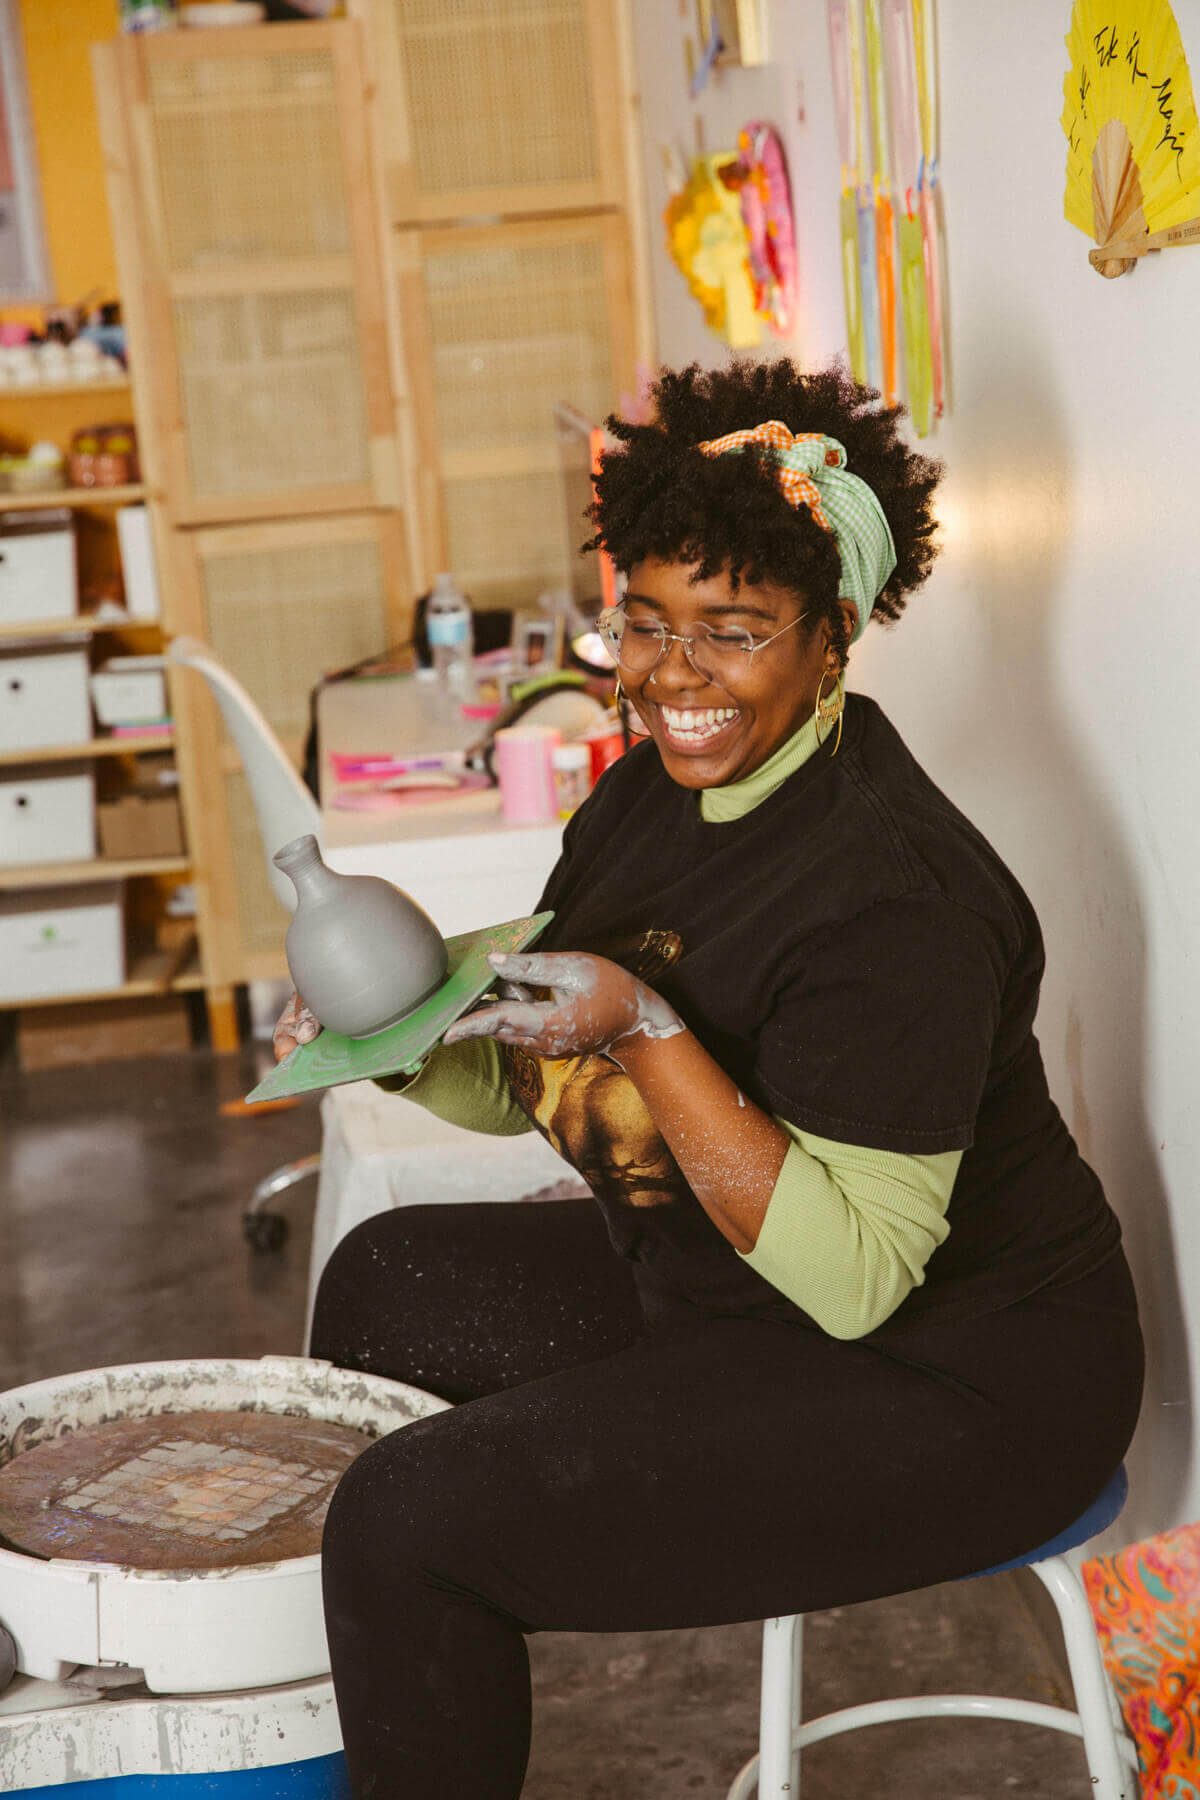 Ceramic Goddess, Sequoyah Johnson, Gives A Masterclass on Self-Ownership During Life's Seasons